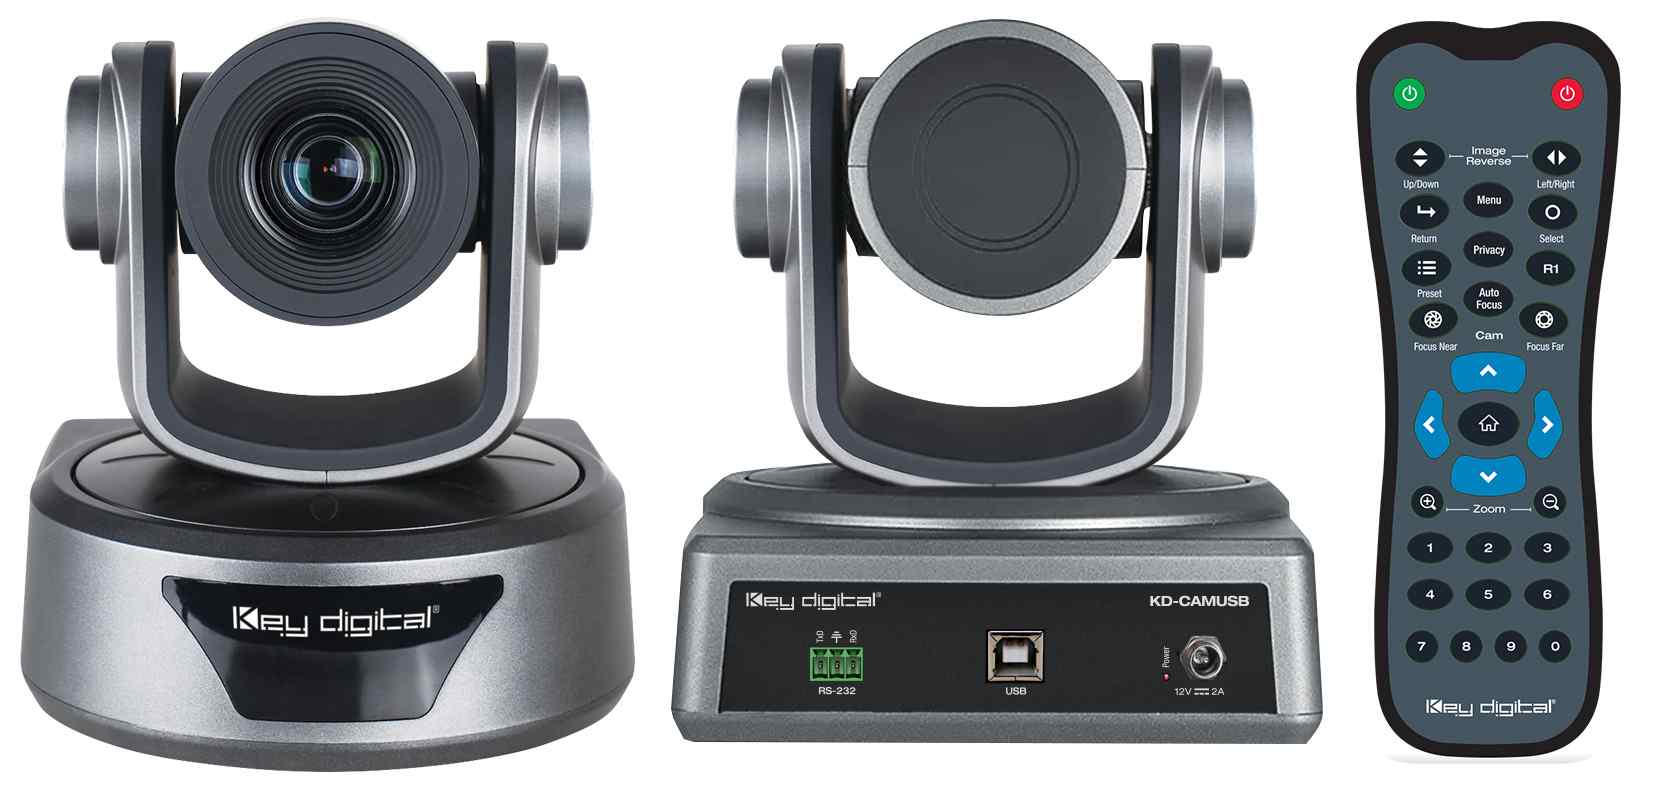 Example Diagram showing multiple devices connected to the video conference camera